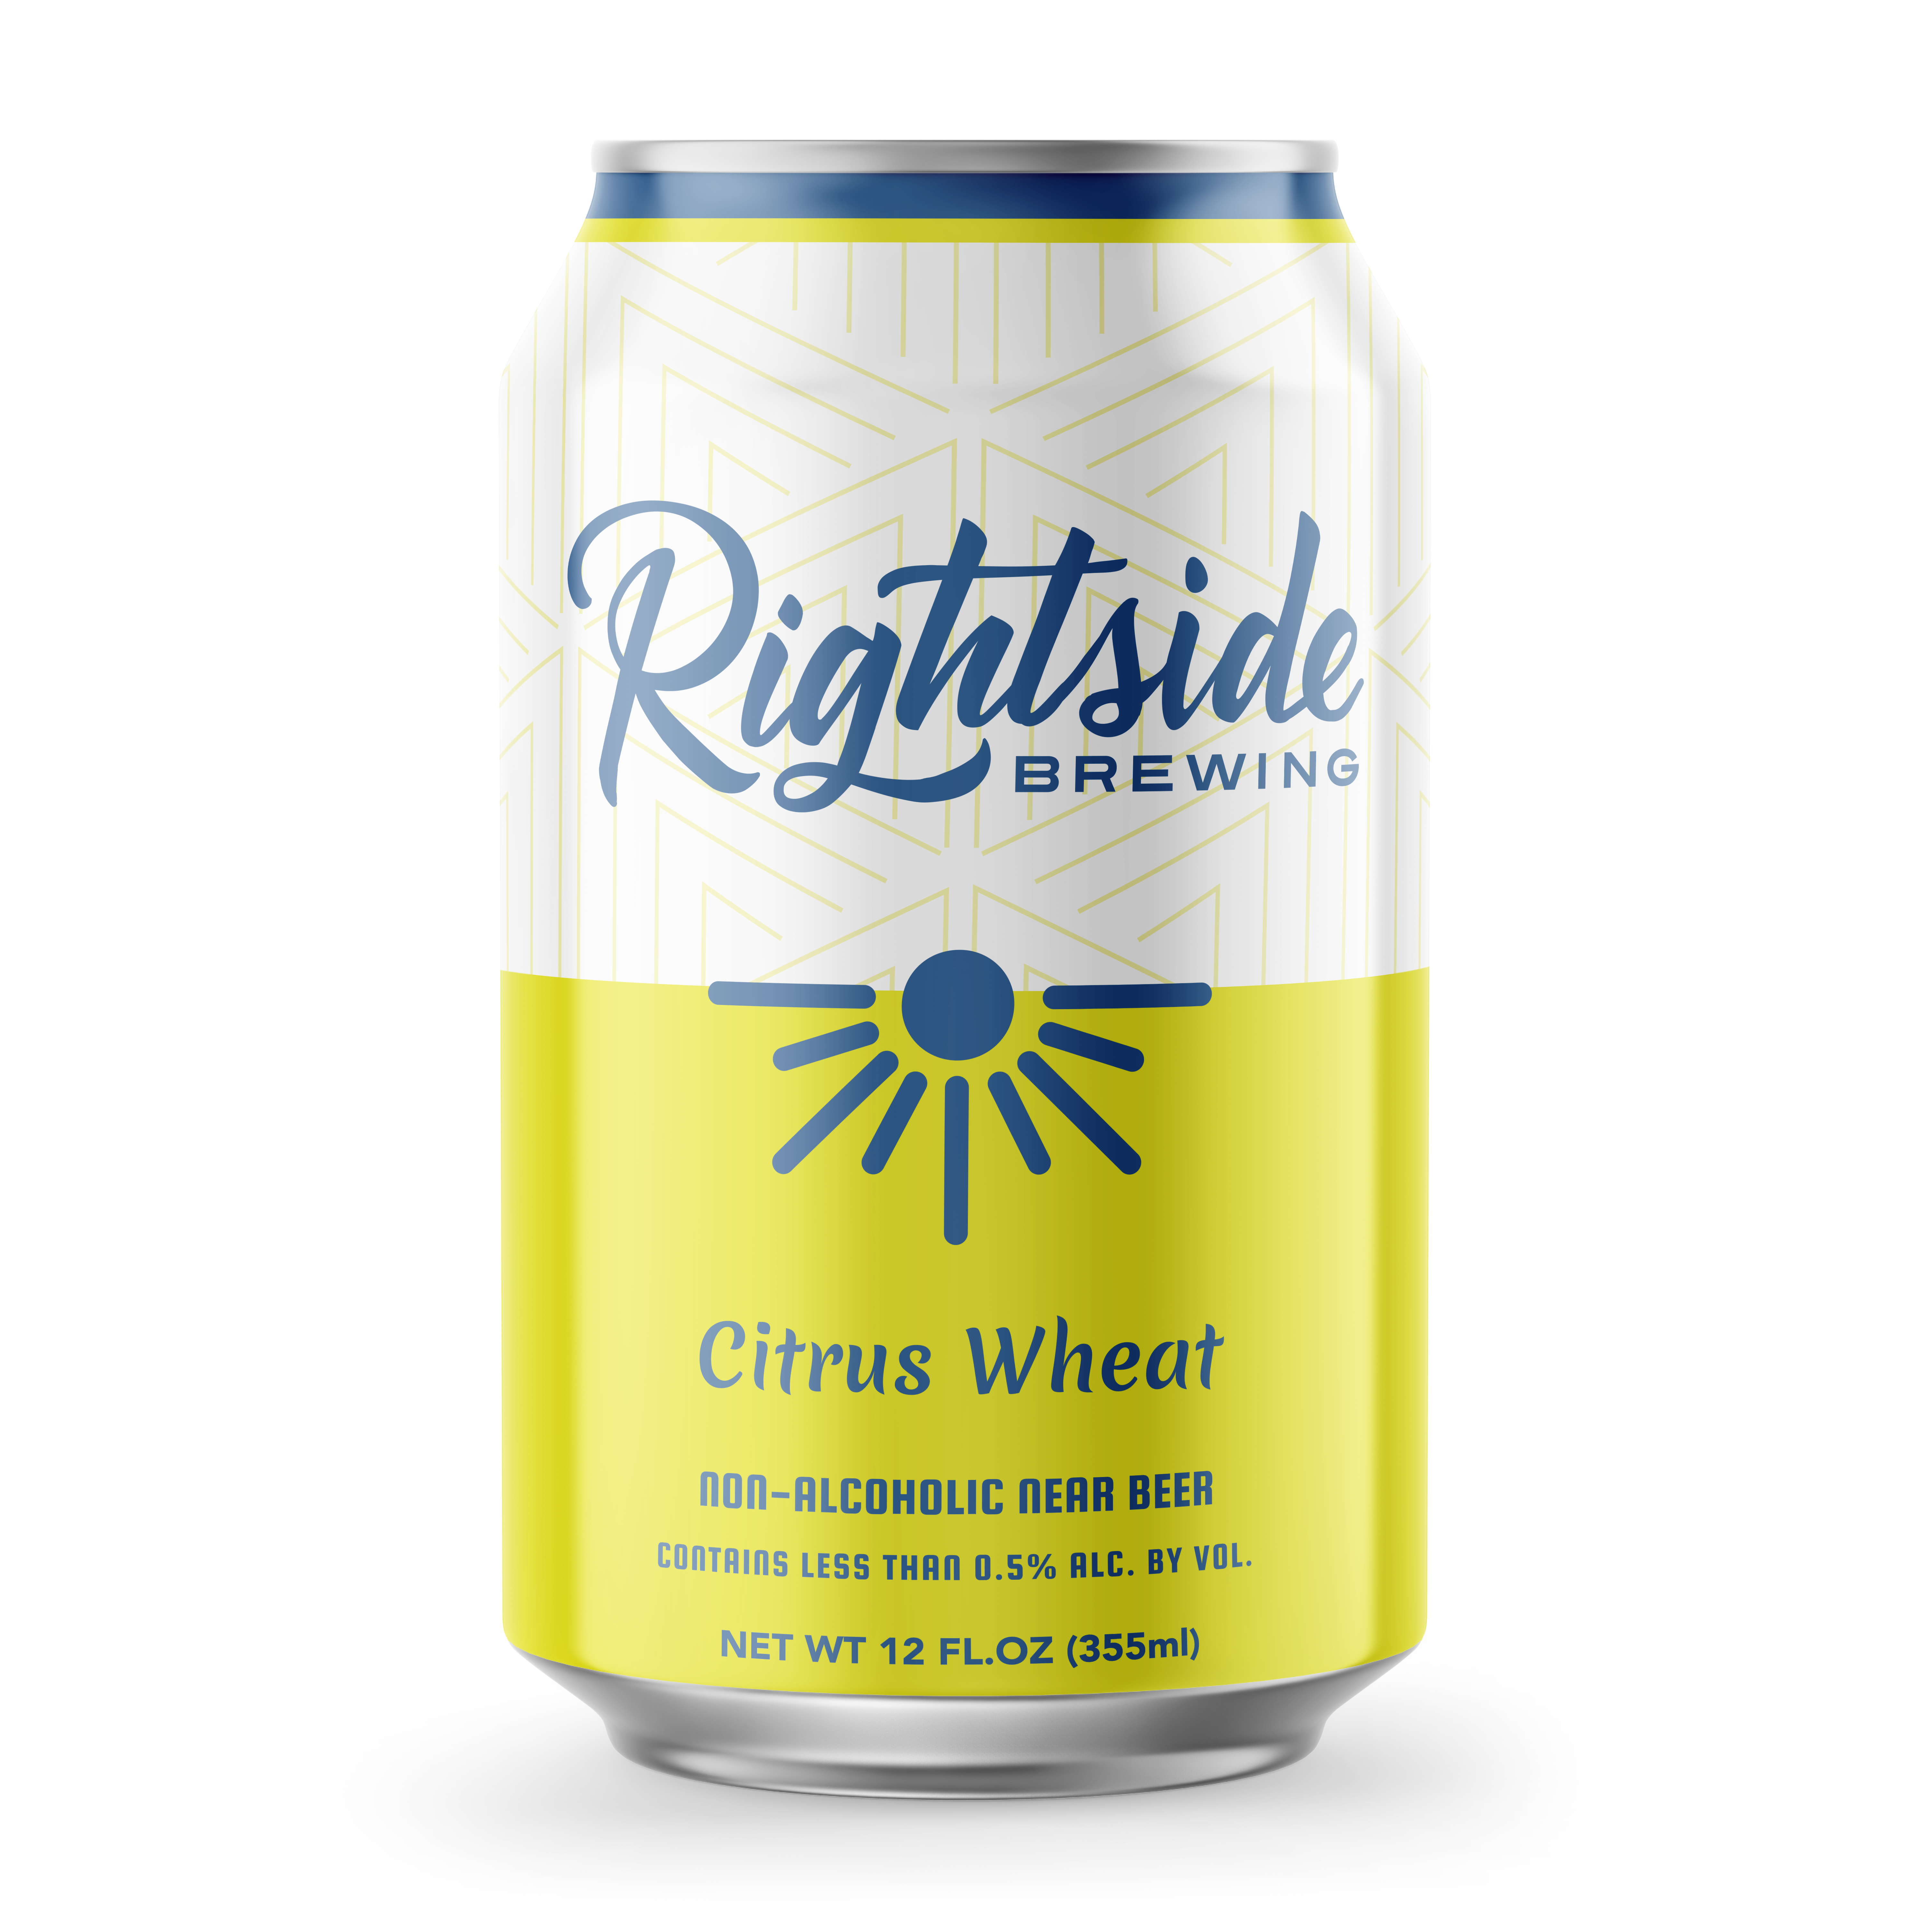 Rightside Citrus Wheat non alcoholic beer